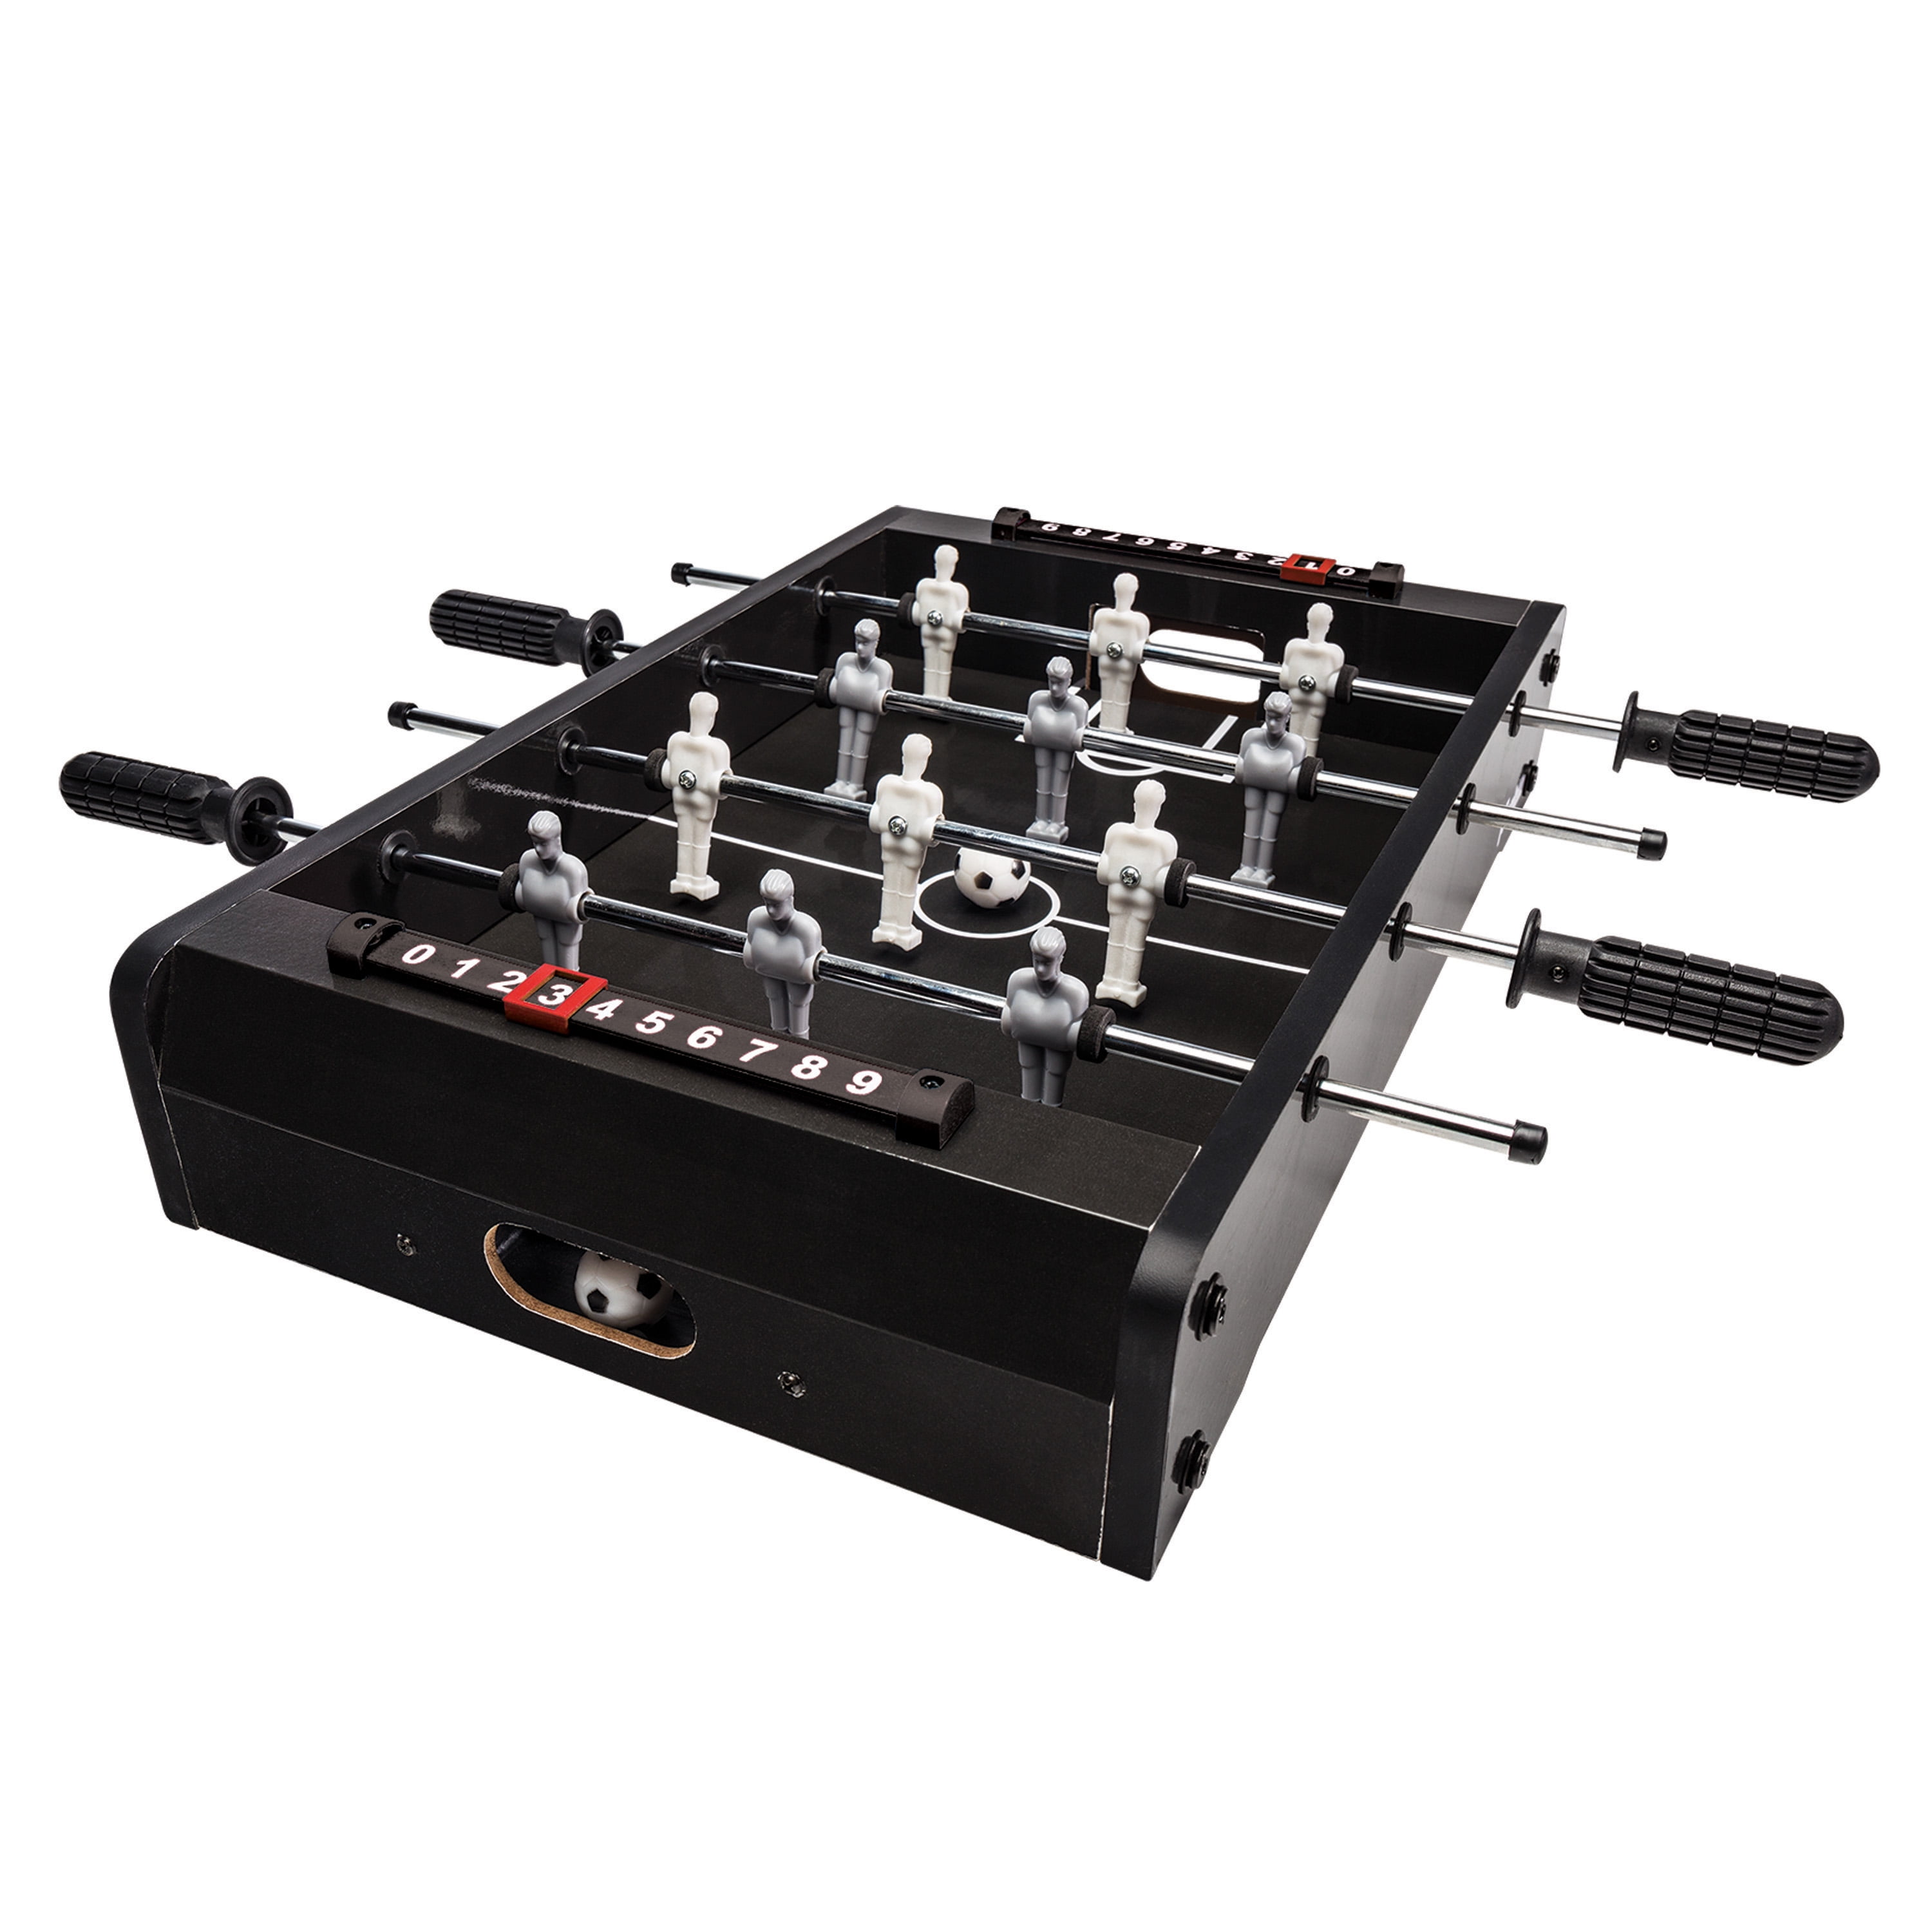 porfeet Mini Foosball Tables, Tabletop Slingshot Games Toys, Children's  Soccer Two-Player Match Table Soccer Field Games Parent-Child Interaction  Boys